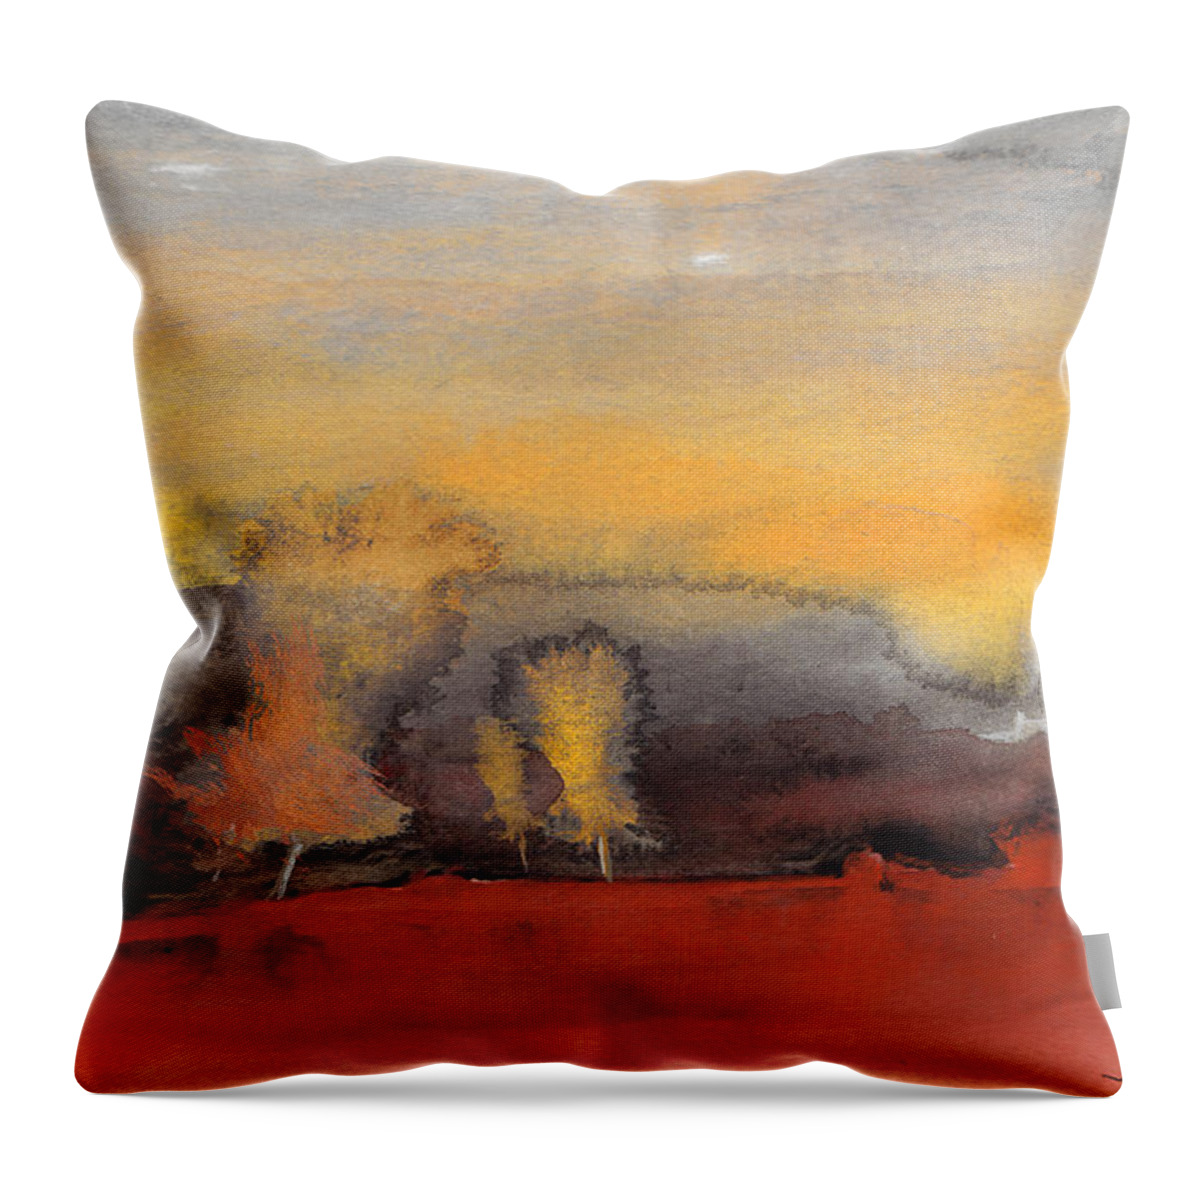 Watercolour Landscape Throw Pillow featuring the painting Sunset 23 by Miki De Goodaboom